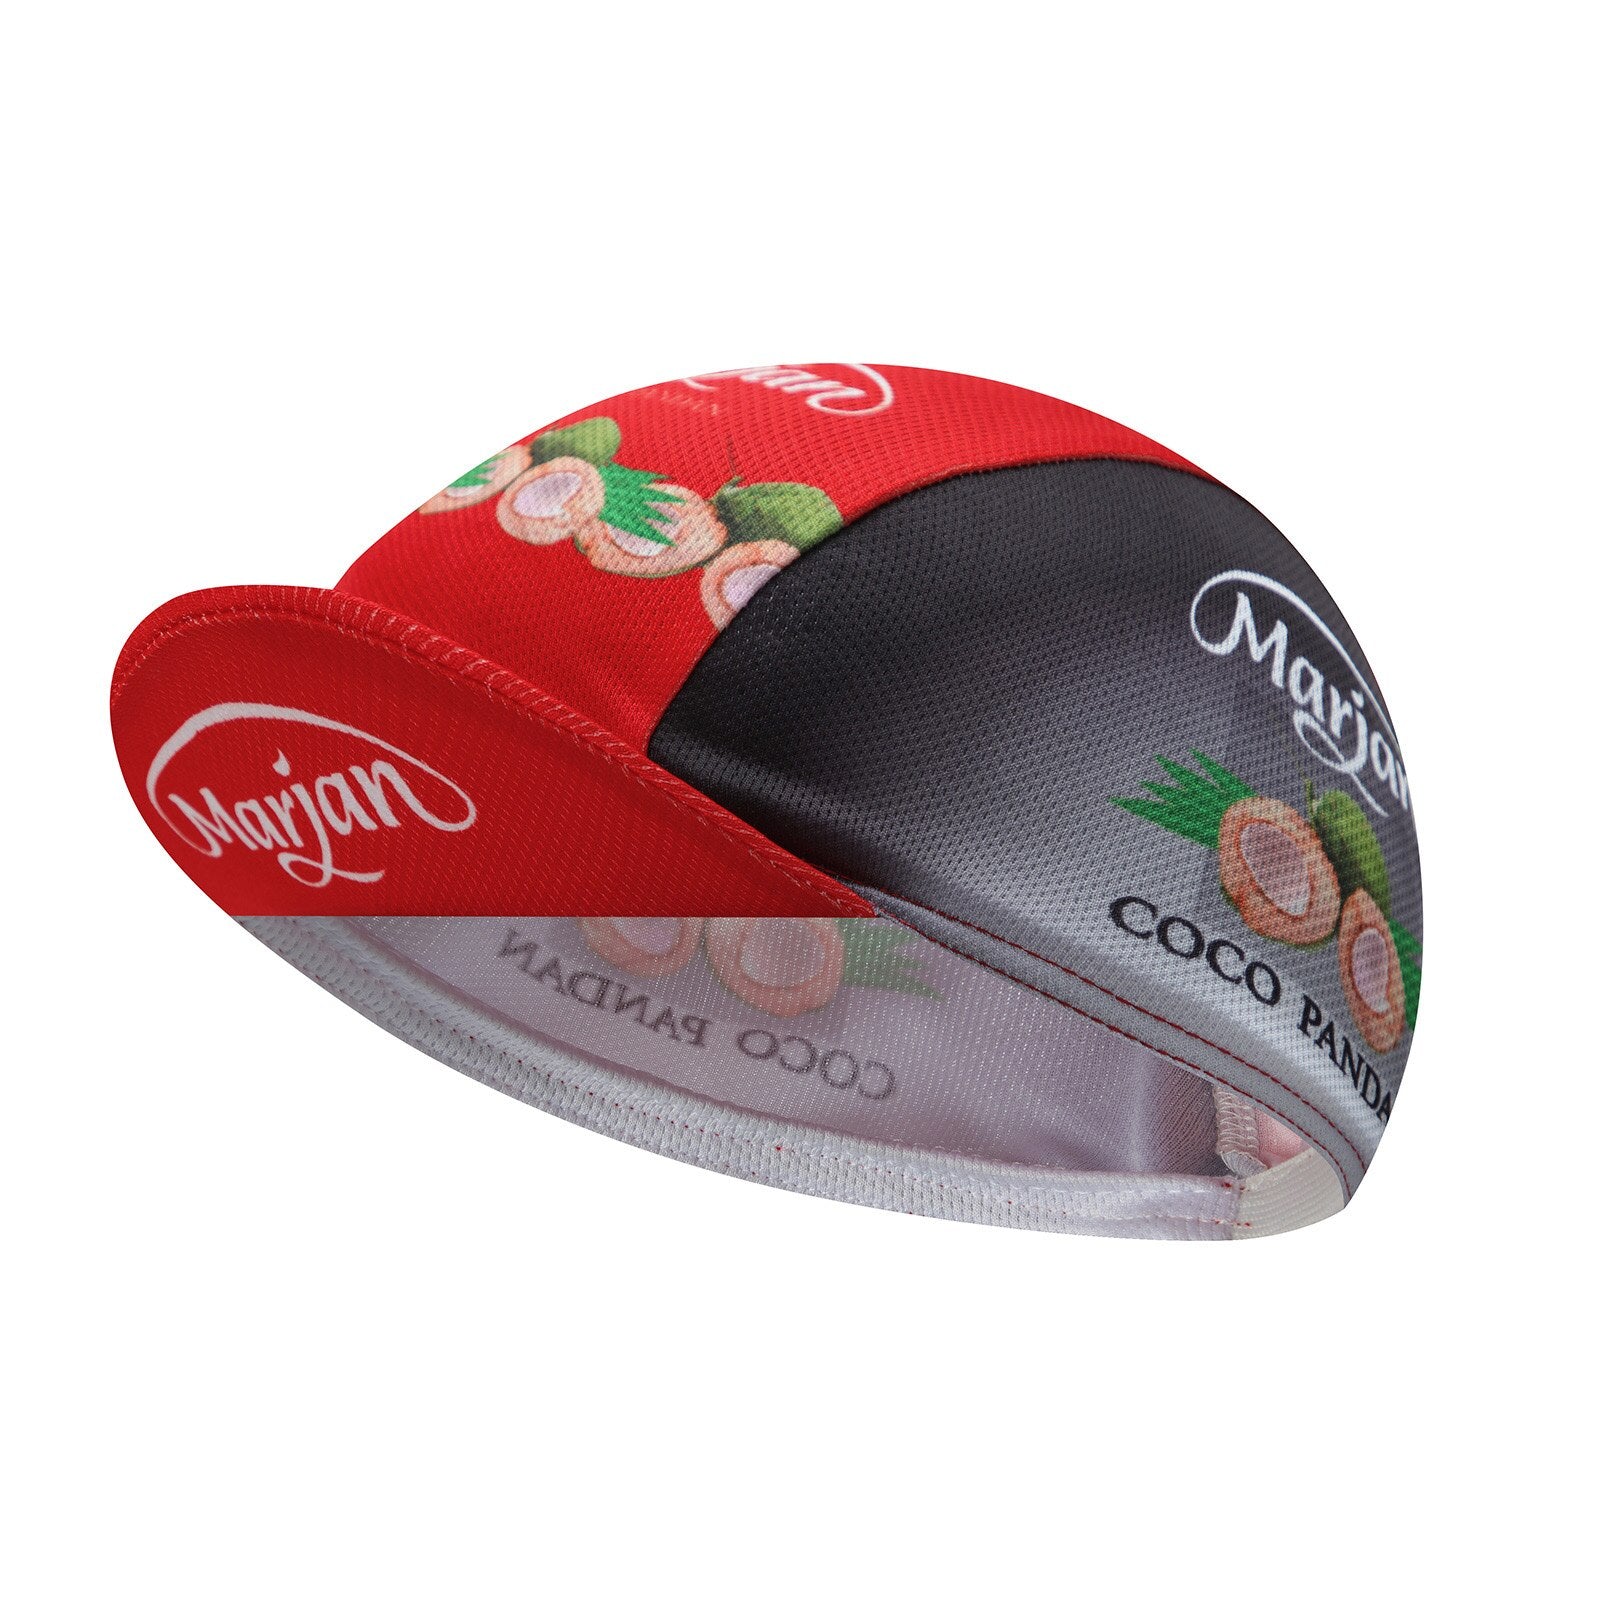 Funny Food And Fruit CYCLING CAP